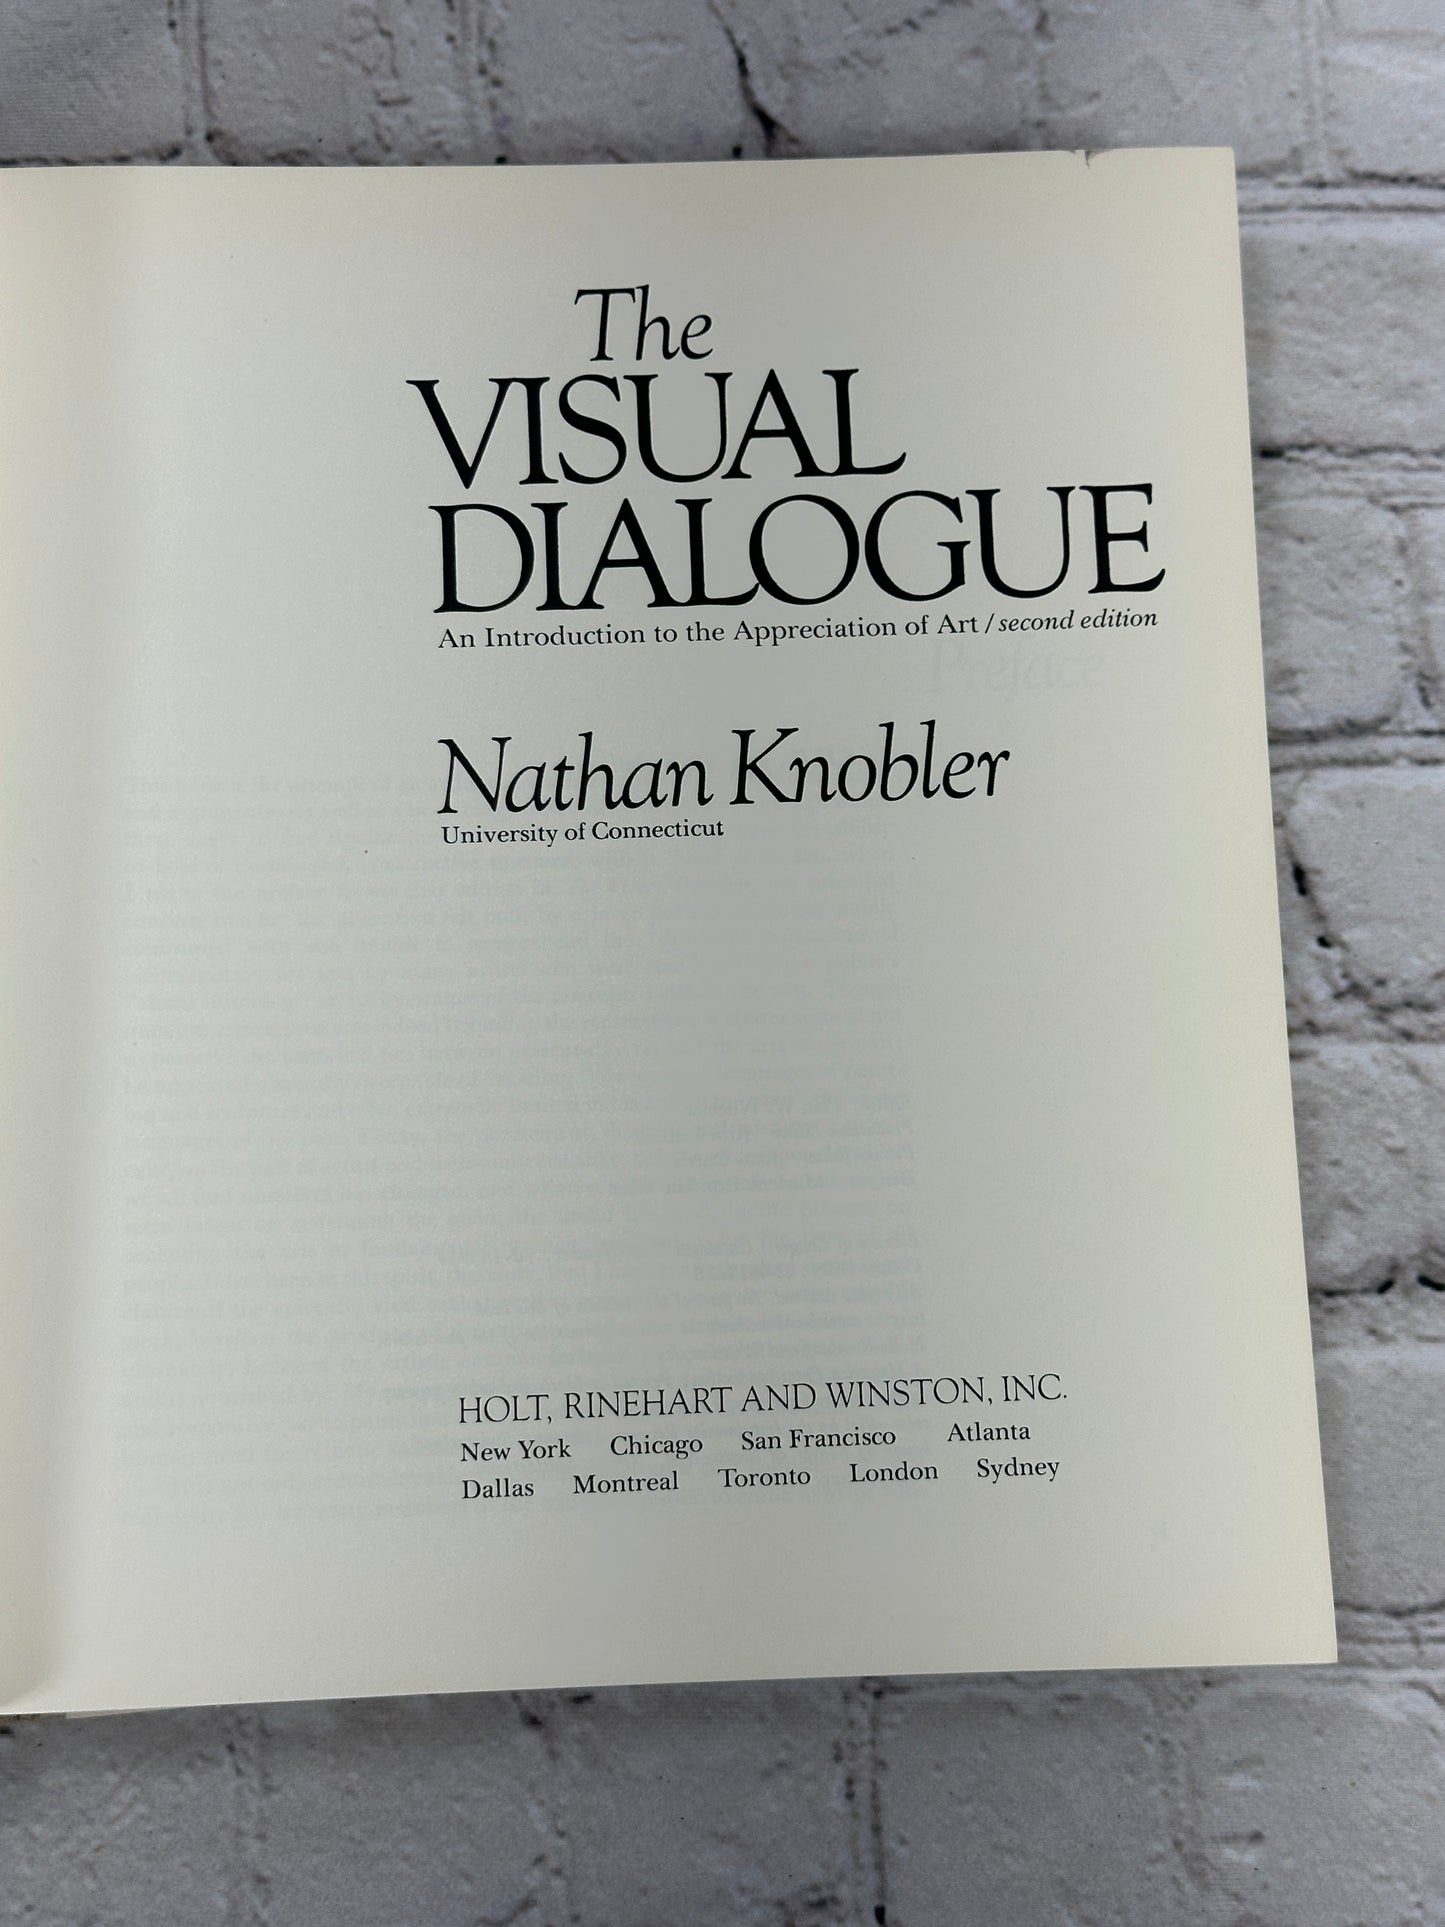 The Visual Dialogue by Nathan Knobler [1st Edition · 1st Printing · 1971]